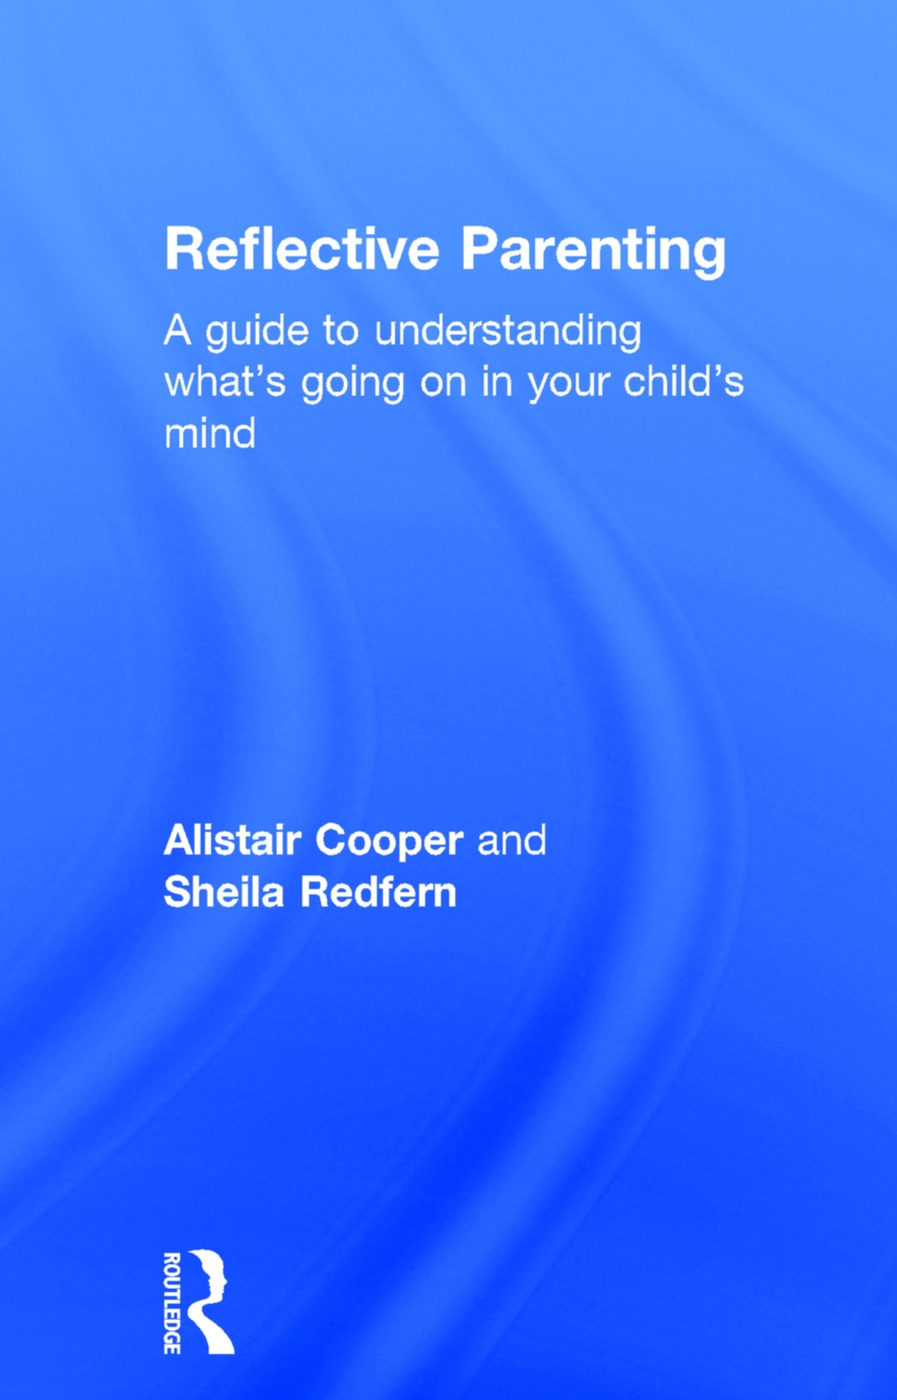 Reflective Parenting: A Guide to Understanding What’s Going on in Your Child’s Mind